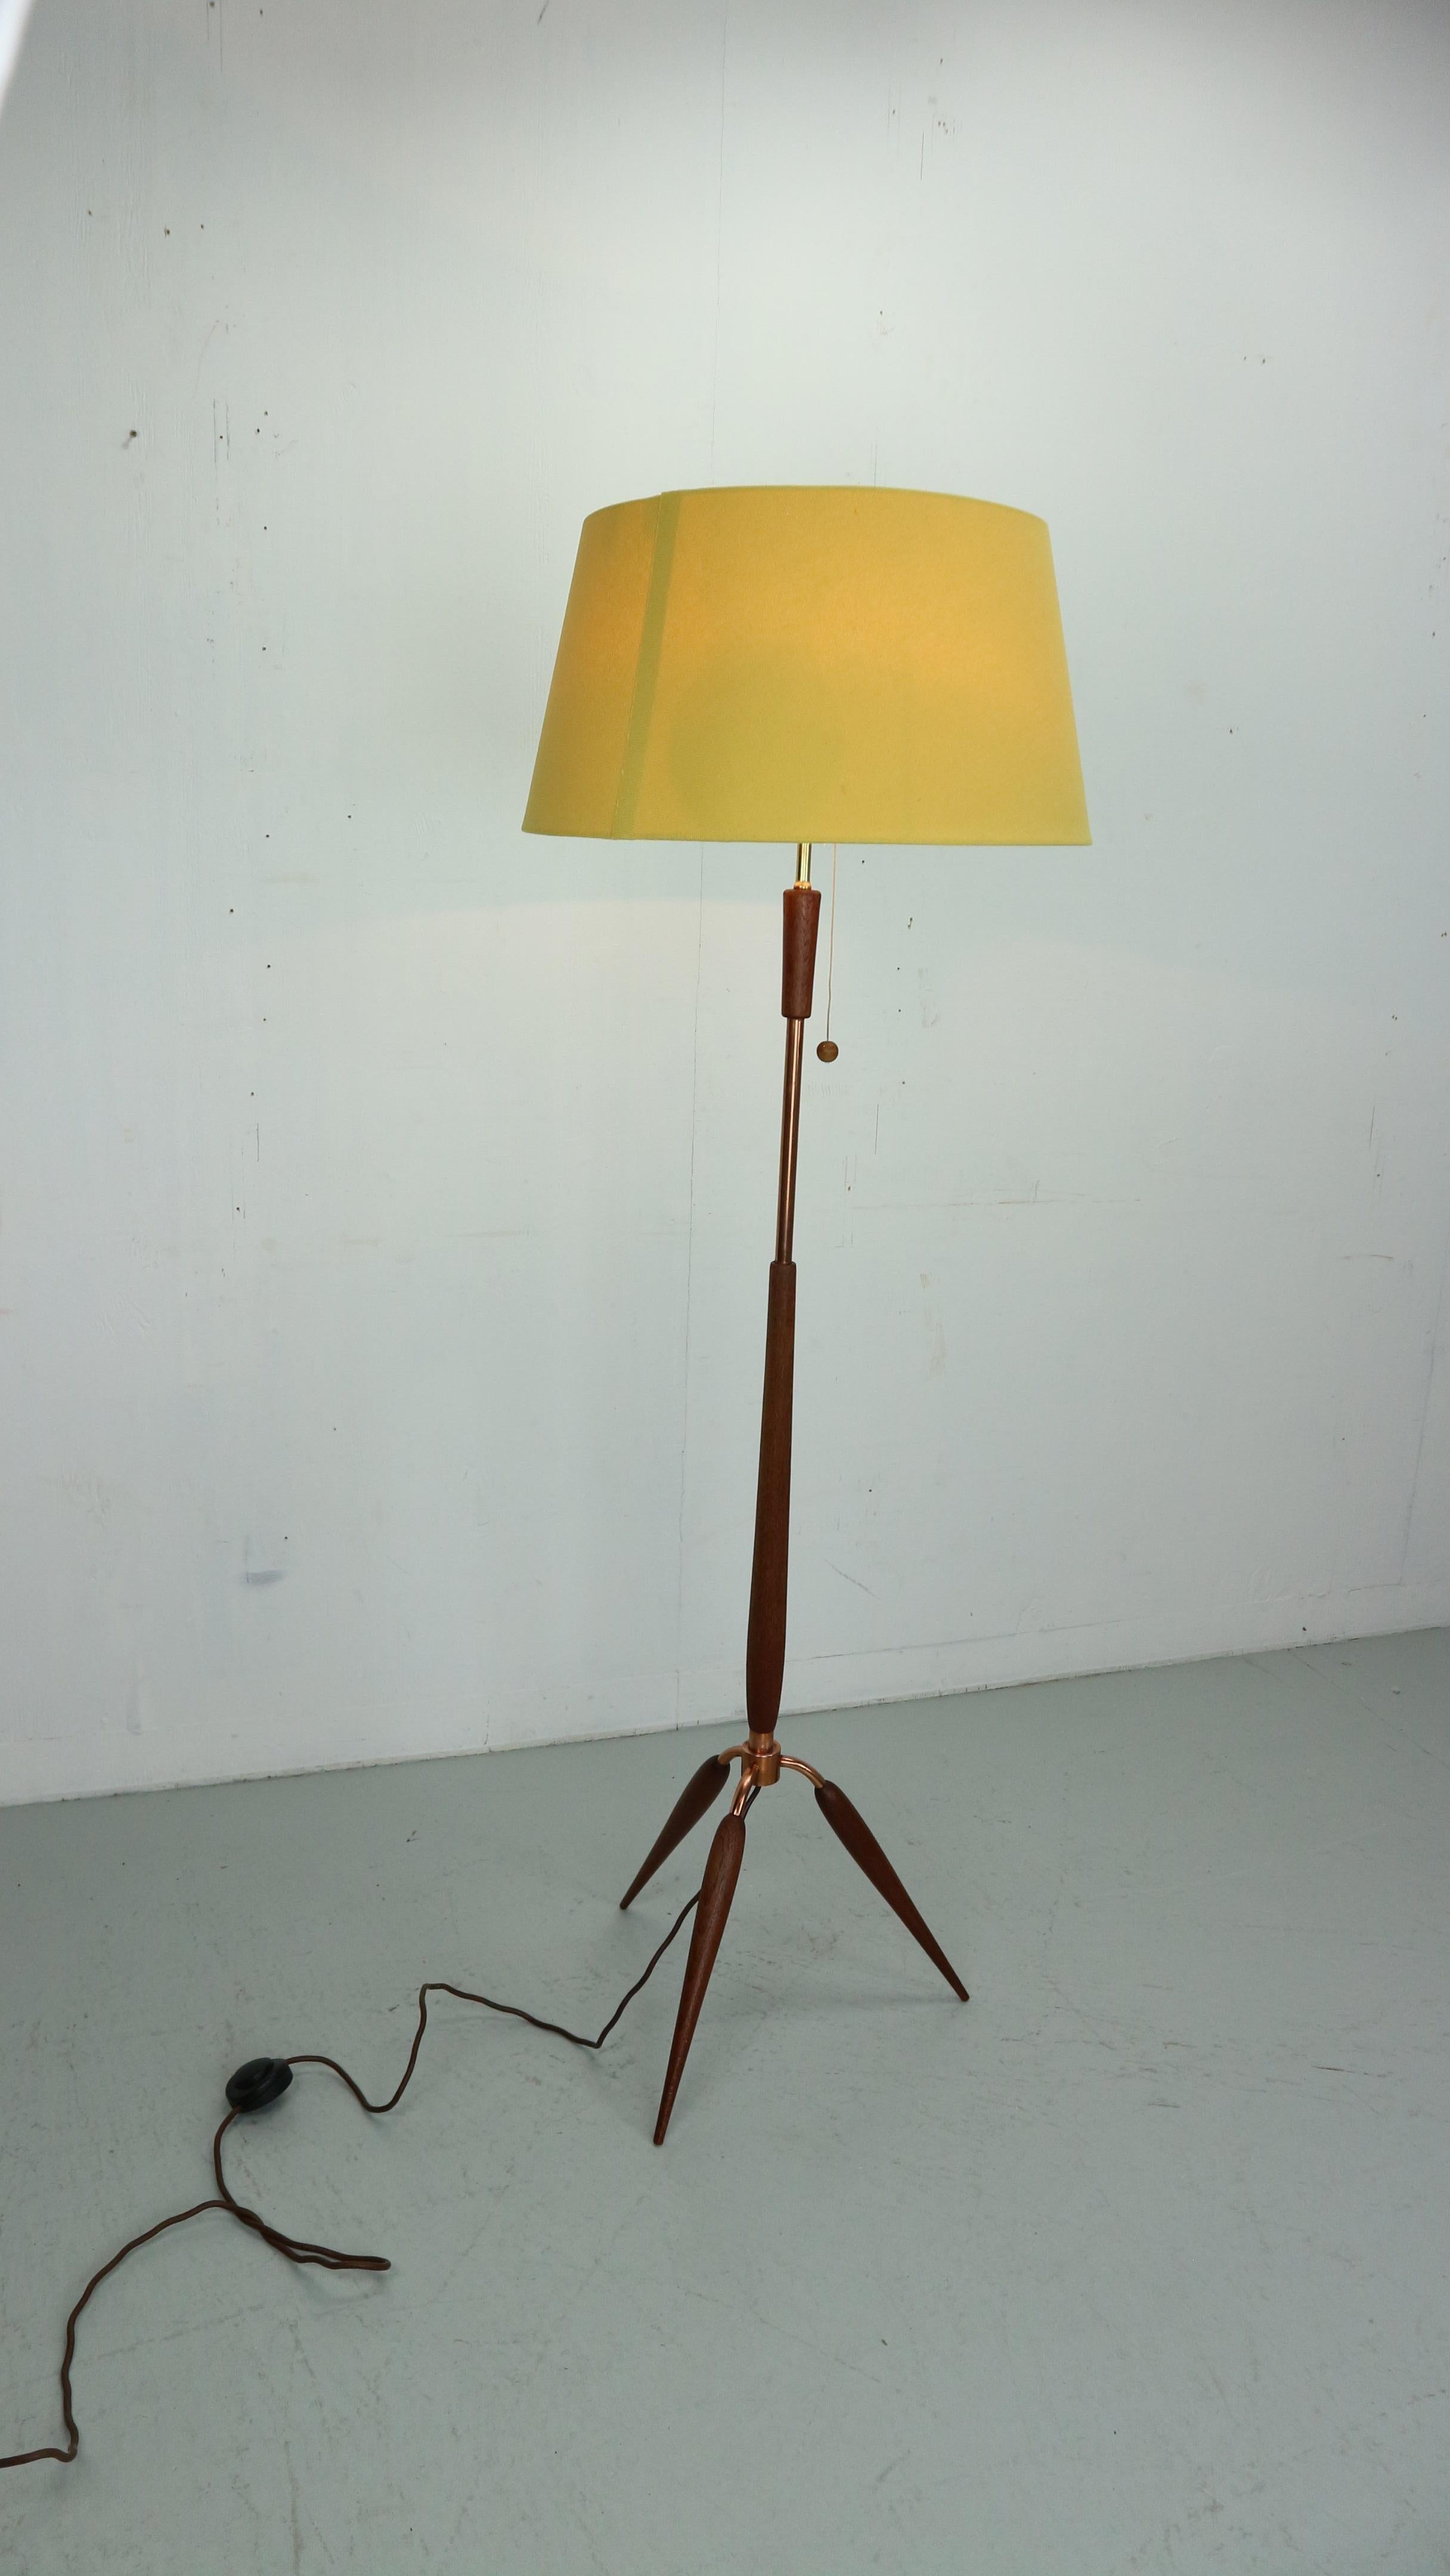 You rarely come across this beautiful tri-pod floor lamp from Fog & Mørup. The teak lamp has beautiful shapes and the combination of the warm wood color with the red and yellow copper makes the lamp an amazing eye-catcher in your home.

The lamp